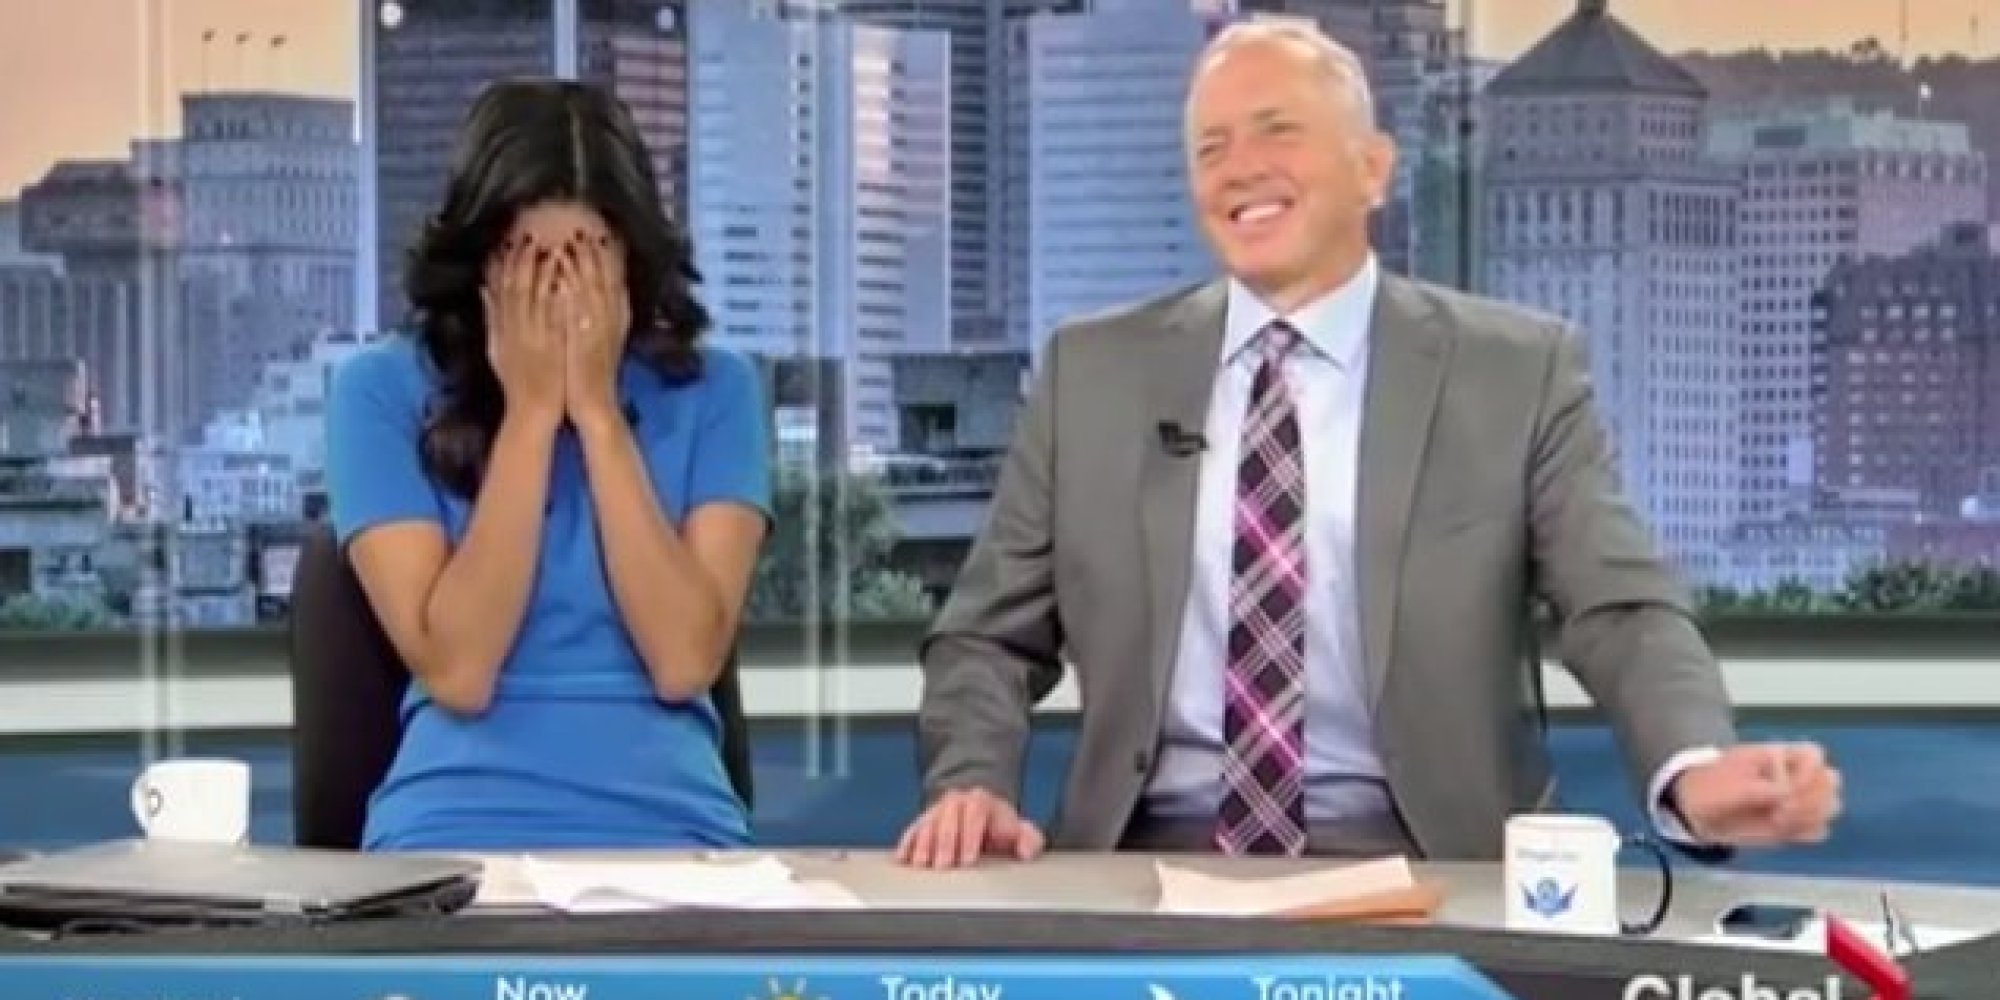 September S News Bloopers Show Why It Pays To Watch The News